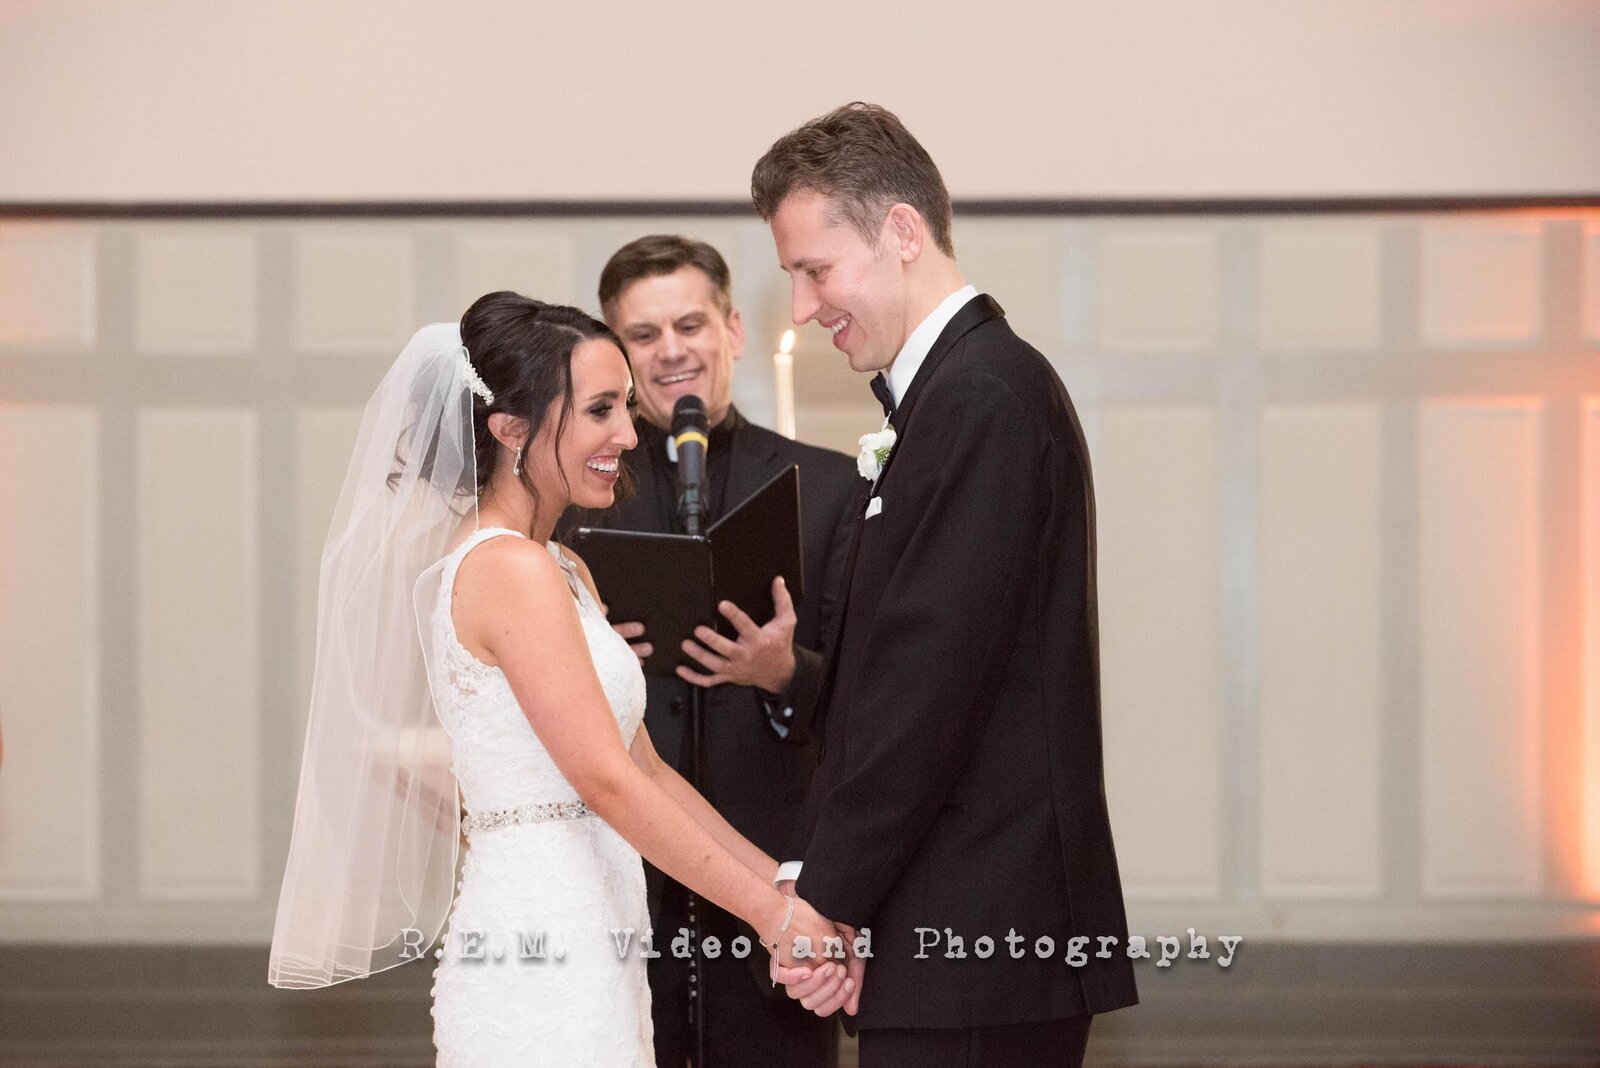 Bride and groom smile during wedding ceremony